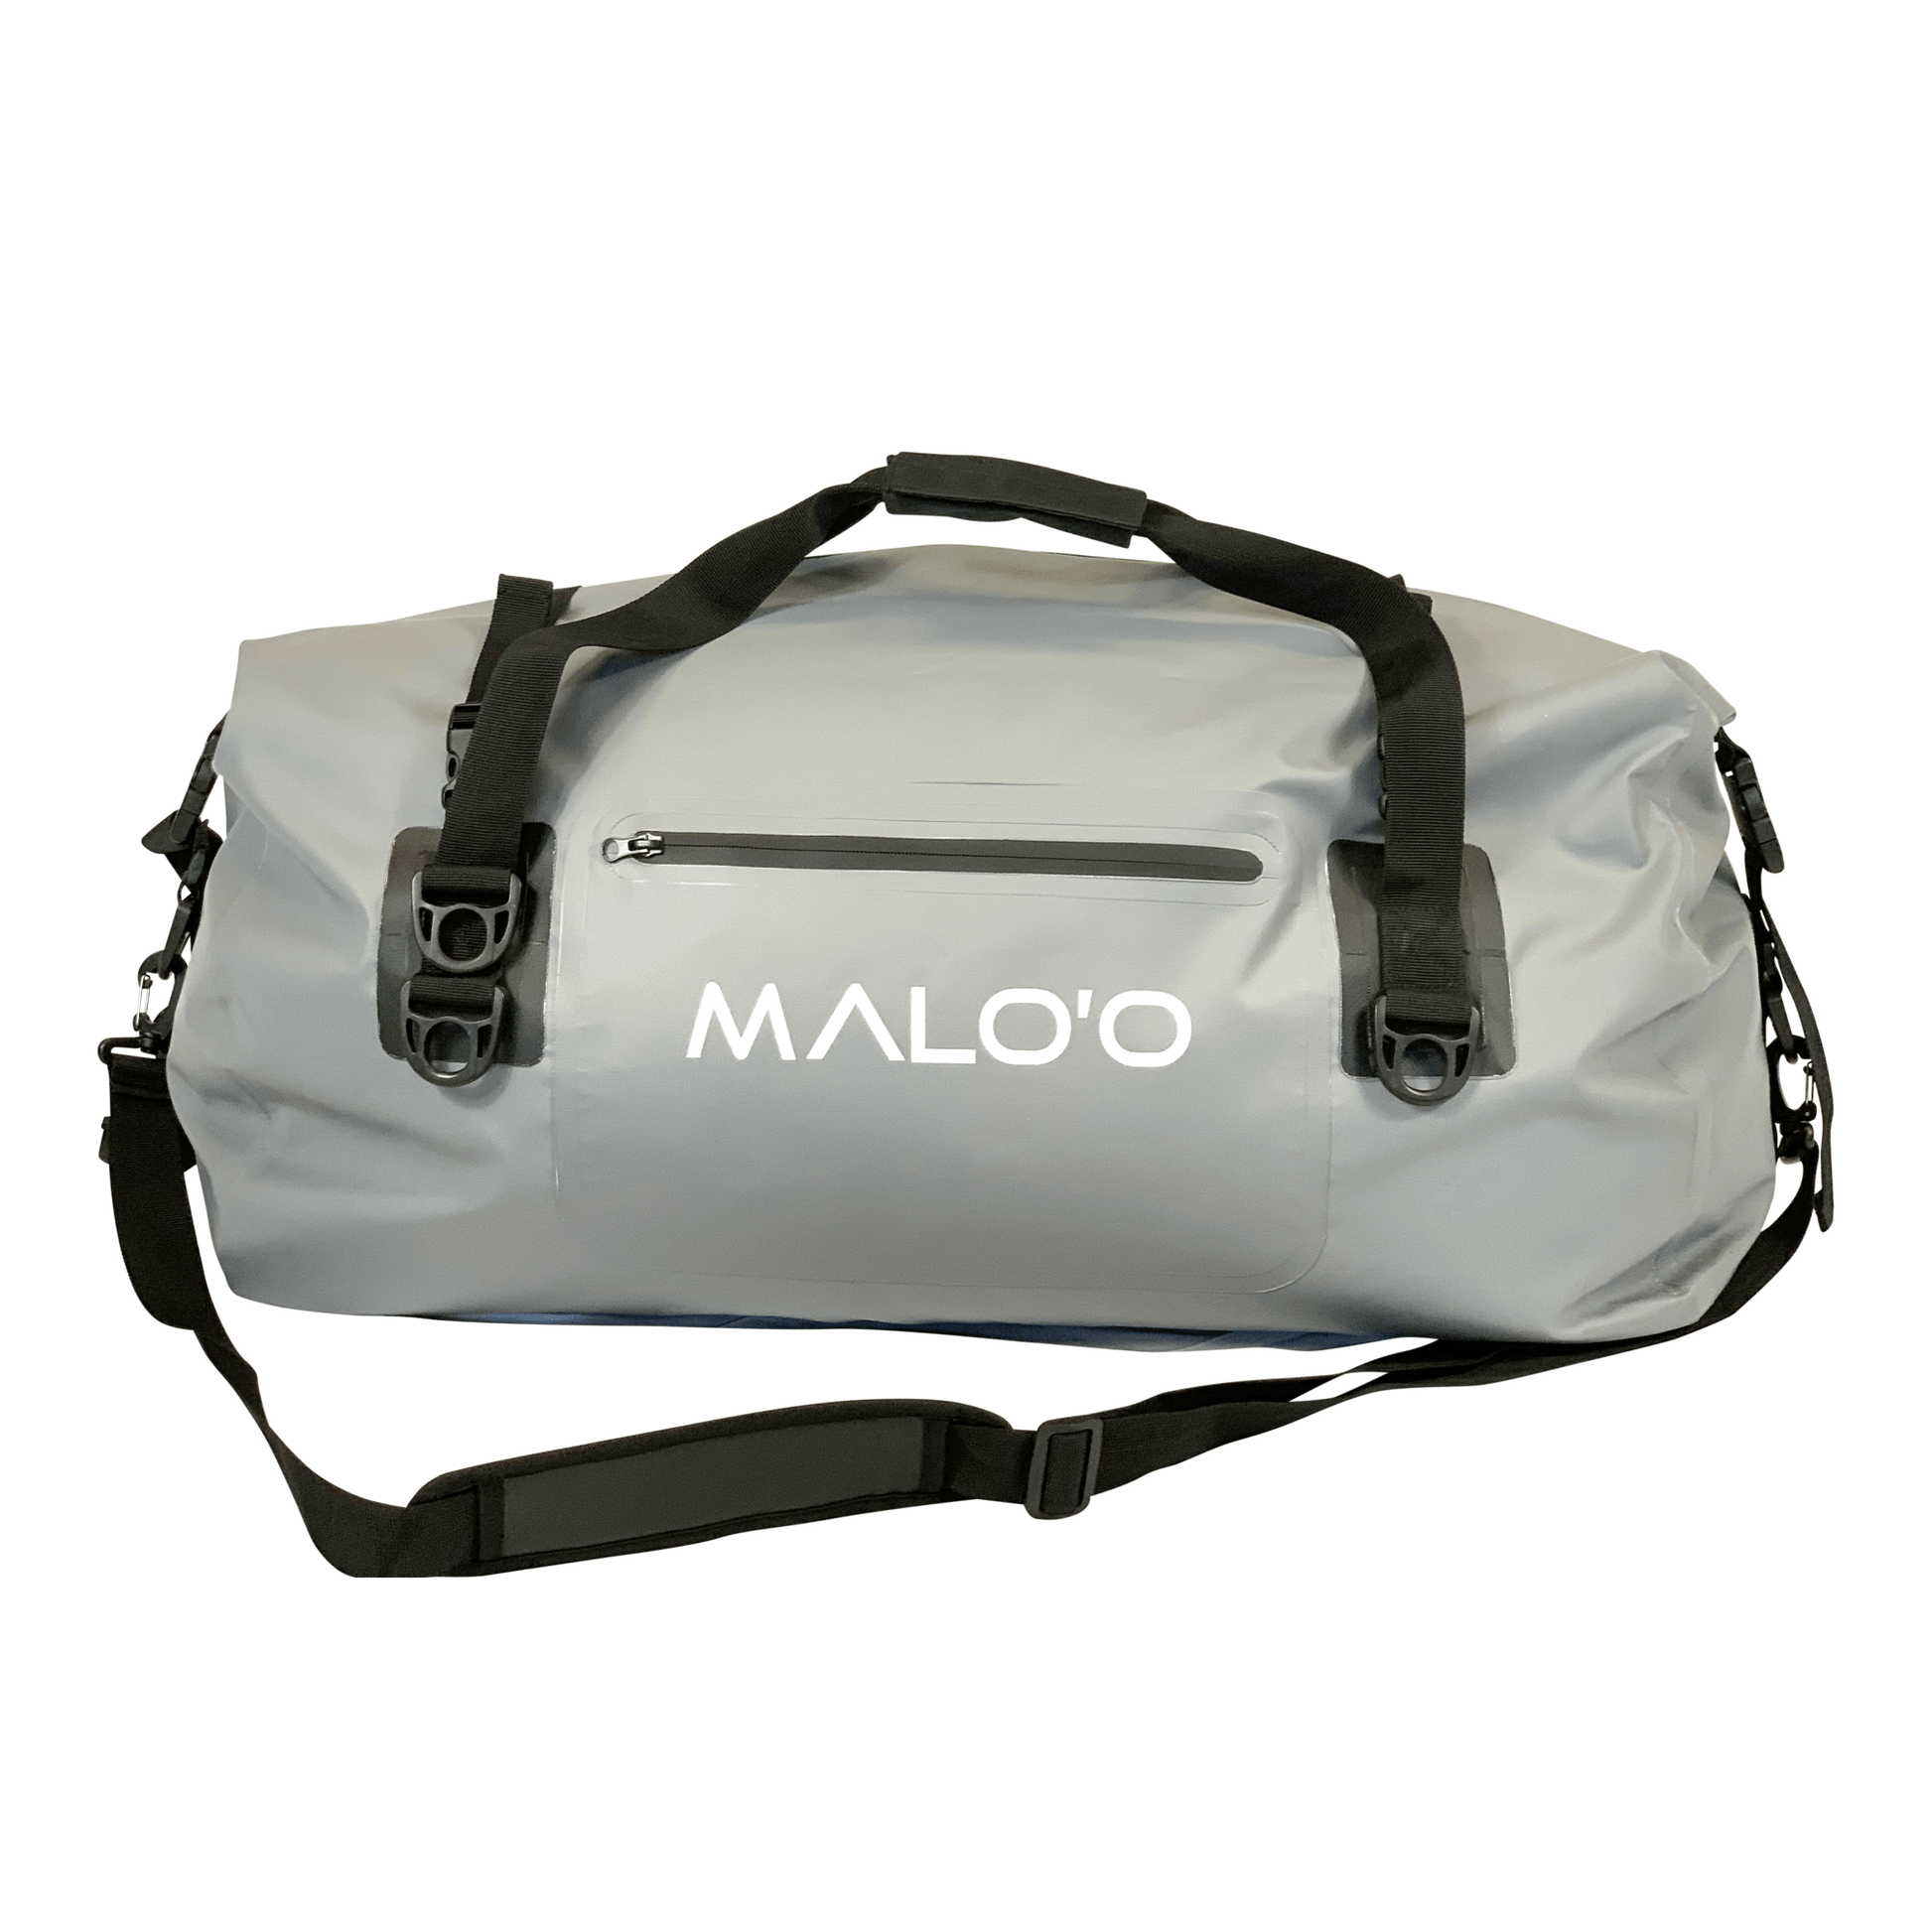 https://greengearcollective.com/cdn/shop/products/malo-o-roll-top-duffle-grey-x-large-60-liter-malo-o-drypack-roll-top-duffle-bag-28257261355079.png?v=1694196181&width=1946